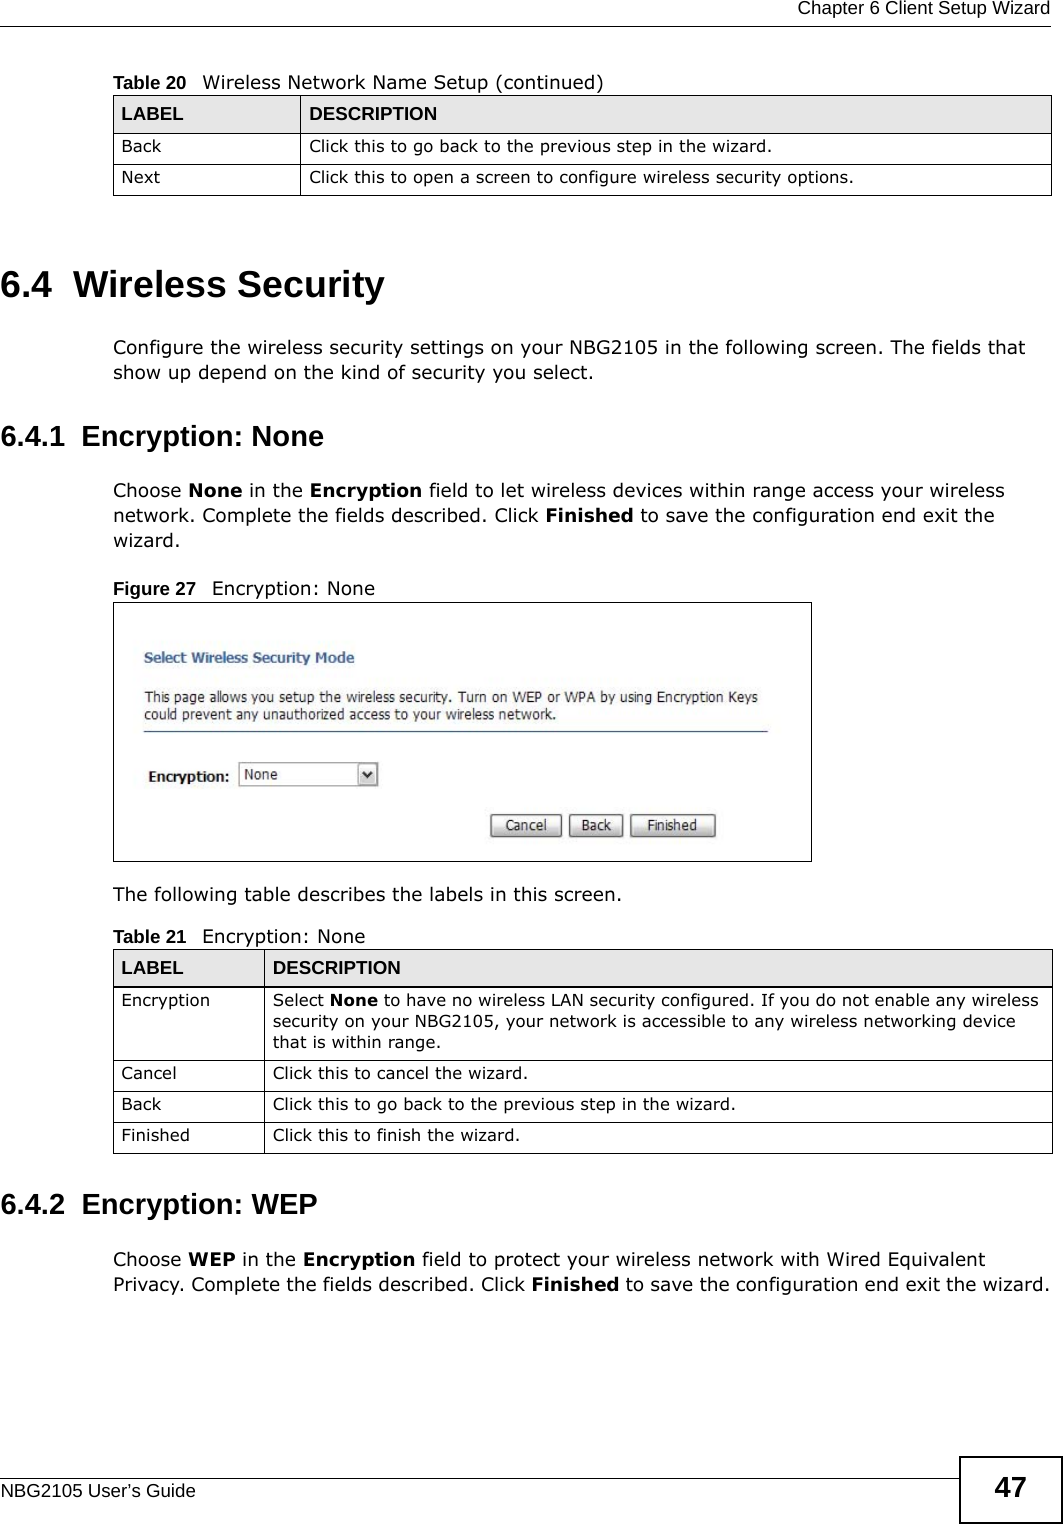  Chapter 6 Client Setup WizardNBG2105 User’s Guide 476.4  Wireless SecurityConfigure the wireless security settings on your NBG2105 in the following screen. The fields that show up depend on the kind of security you select.6.4.1  Encryption: NoneChoose None in the Encryption field to let wireless devices within range access your wireless network. Complete the fields described. Click Finished to save the configuration end exit the wizard.Figure 27   Encryption: None The following table describes the labels in this screen.6.4.2  Encryption: WEPChoose WEP in the Encryption field to protect your wireless network with Wired Equivalent Privacy. Complete the fields described. Click Finished to save the configuration end exit the wizard.Back Click this to go back to the previous step in the wizard.Next Click this to open a screen to configure wireless security options.Table 20   Wireless Network Name Setup (continued)LABEL DESCRIPTIONTable 21   Encryption: NoneLABEL DESCRIPTIONEncryption Select None to have no wireless LAN security configured. If you do not enable any wireless security on your NBG2105, your network is accessible to any wireless networking device that is within range. Cancel Click this to cancel the wizard.Back Click this to go back to the previous step in the wizard.Finished Click this to finish the wizard.